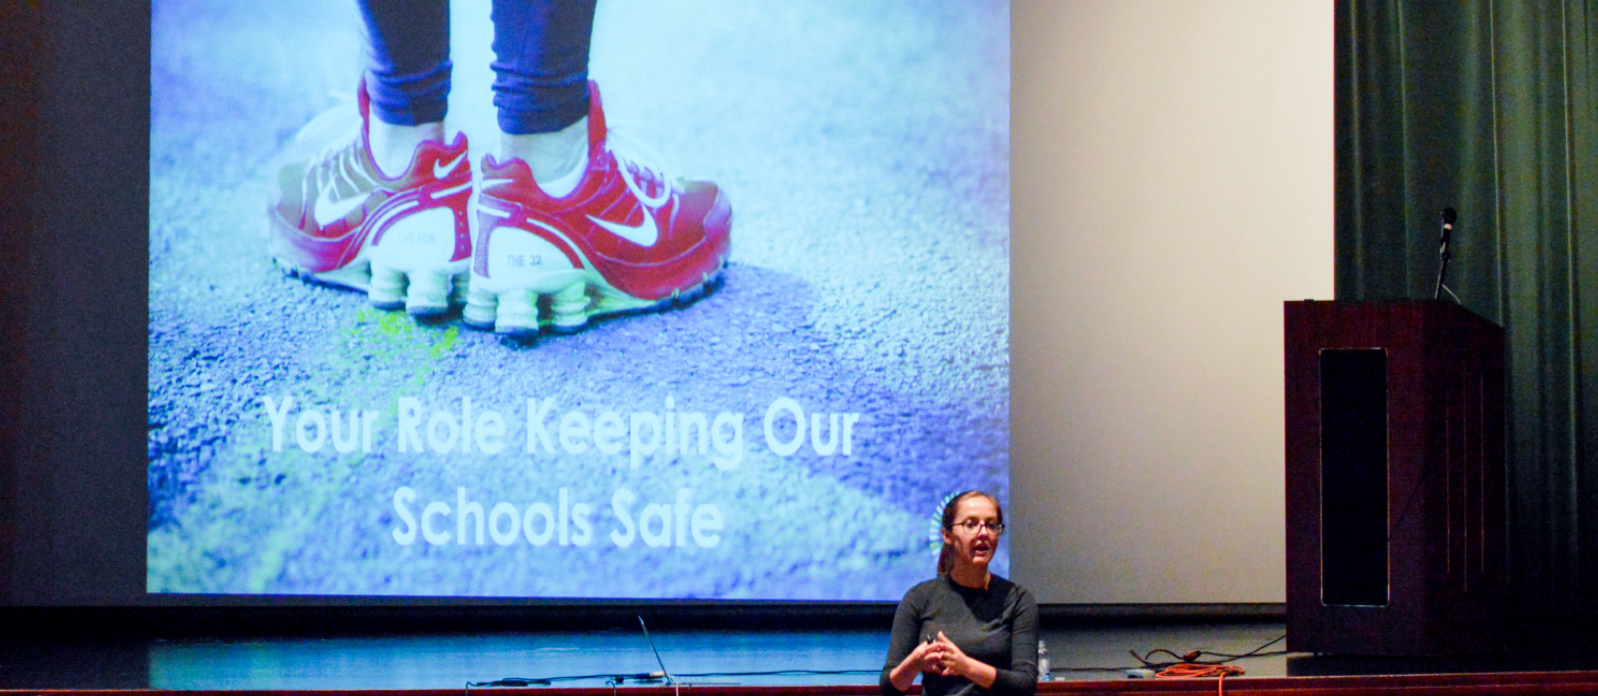 A presentation screen showing an image of shoes and the quote "Your role in keeping our schools safe"